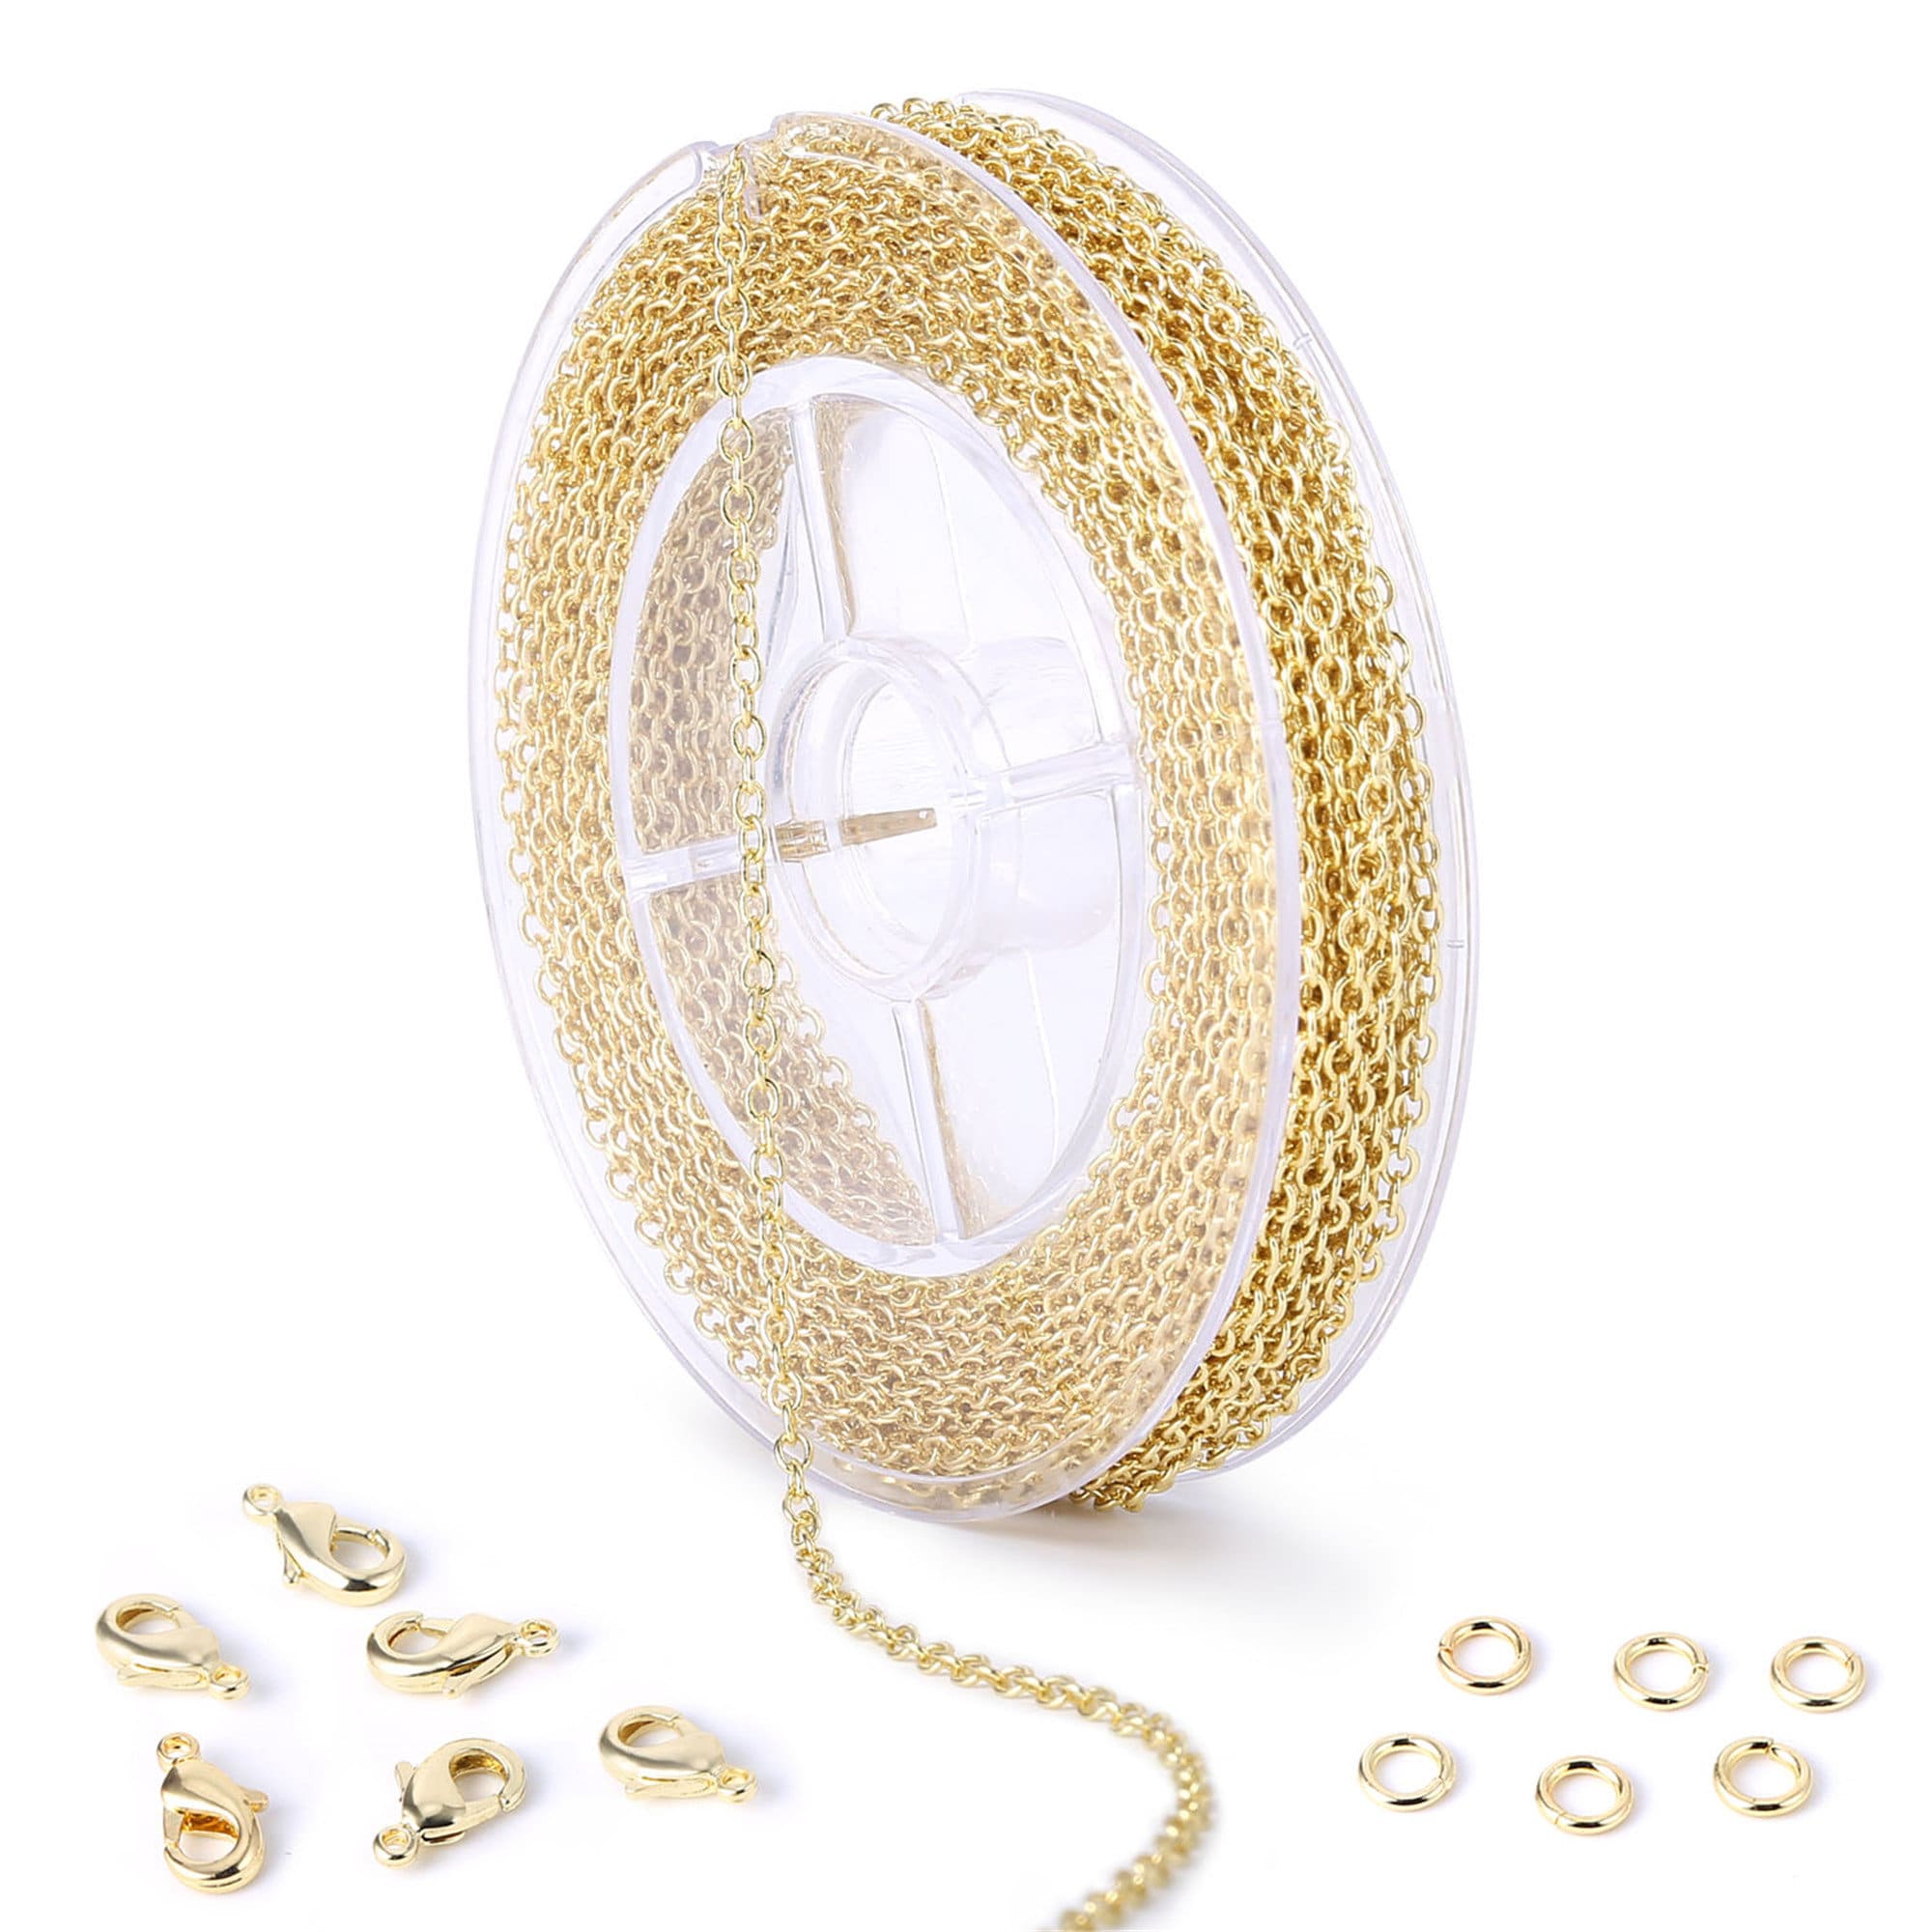 ALEXCRAFT Gold Chain for Jewelry Making, 33 Feet 2mm Thin Dainty Cable